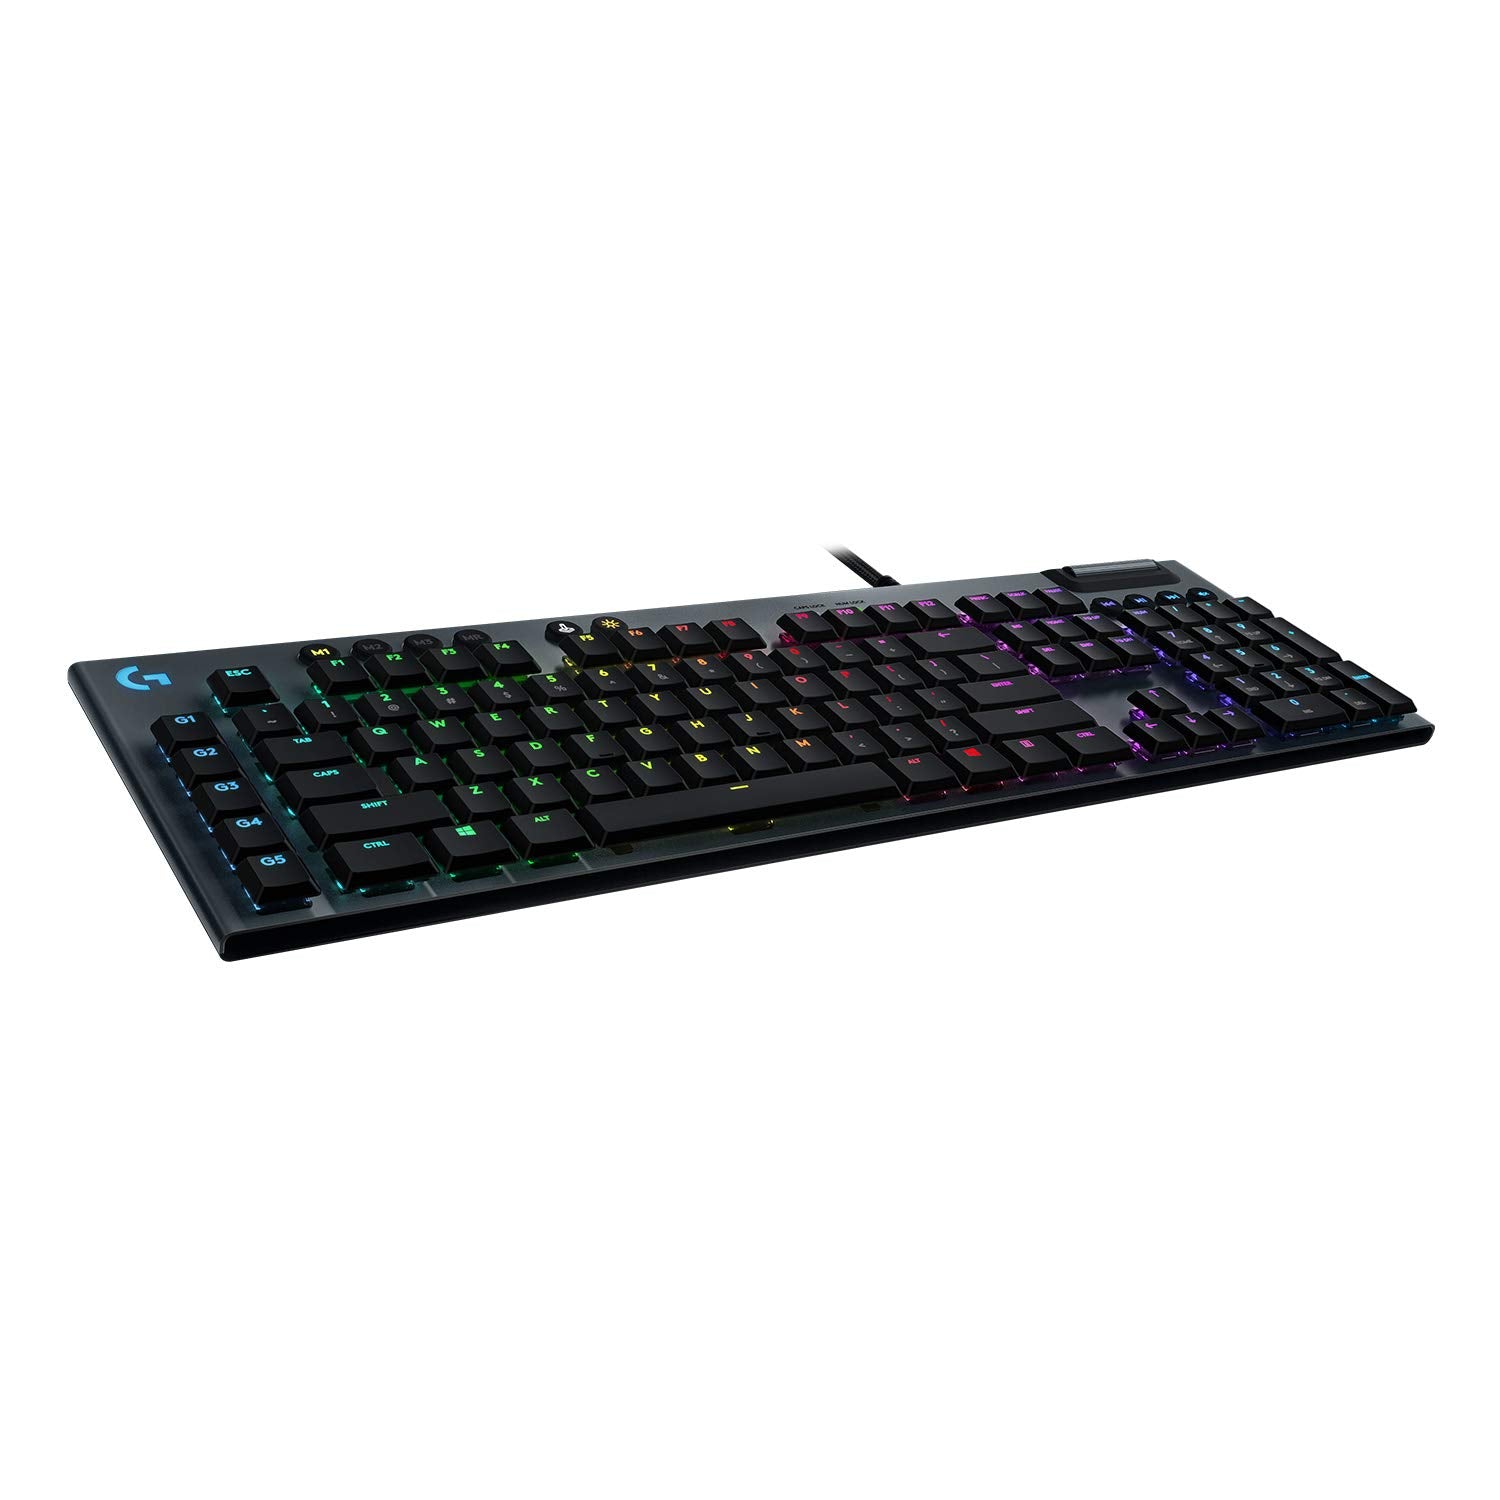 Logitech G815 LIGHTSYNC RGB Wired Mechanical Gaming Keyboard with low profile GL-Tactile key switches, 5 programmable G-keys, USB Passthrough, Dedicated media controls, QWERTY UK Layout - Black